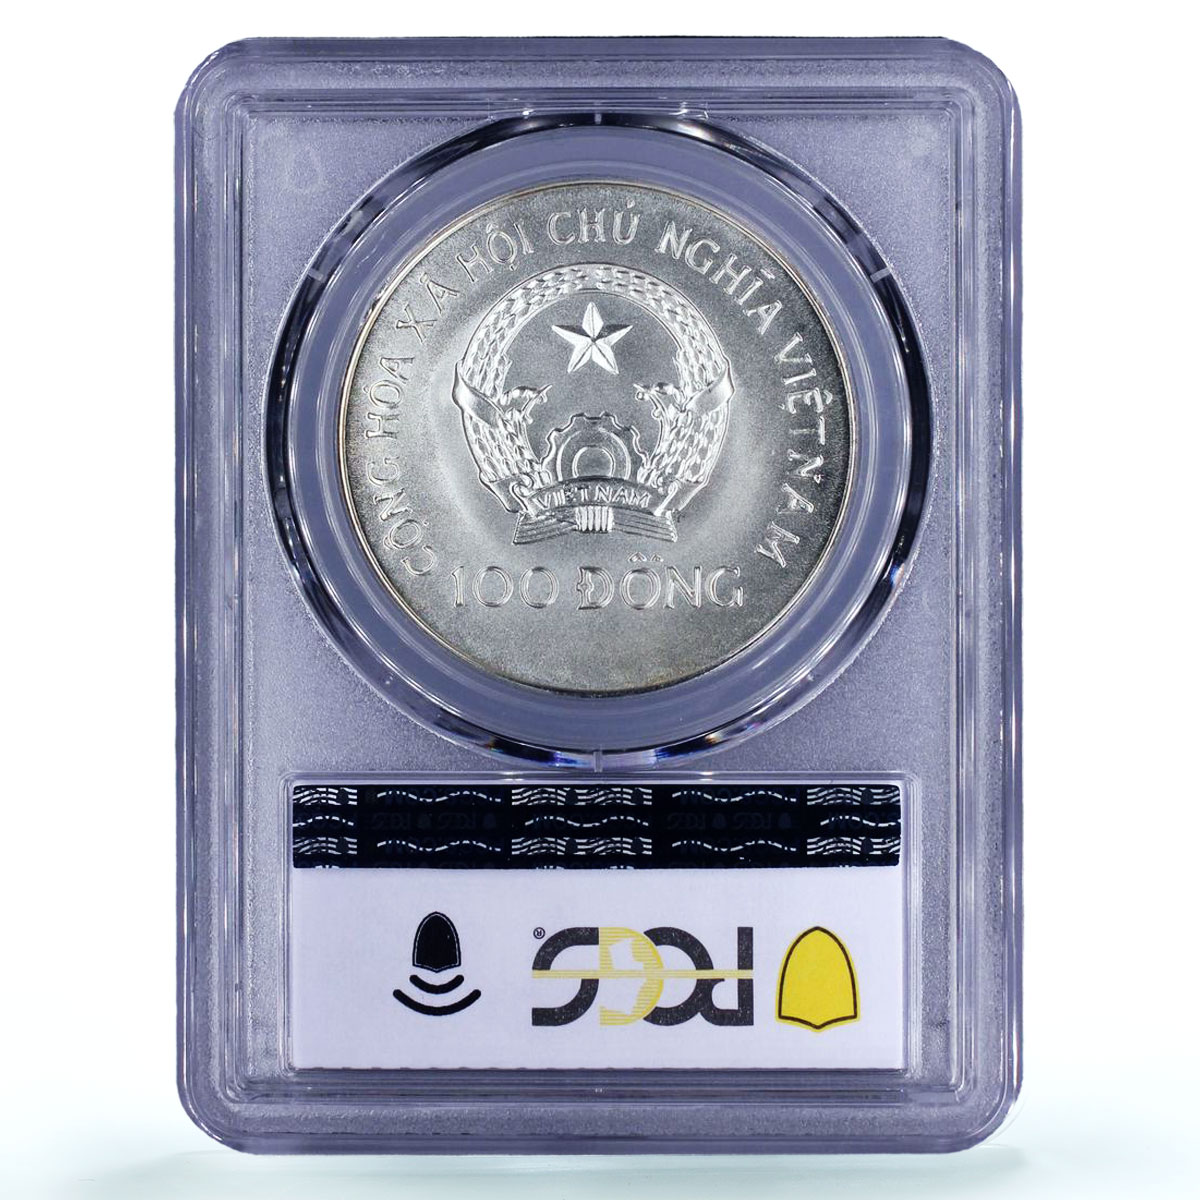 Vietnam 100 dong Seafaring Dragon Boat Ship Large MS69 PCGS silver coin 1988